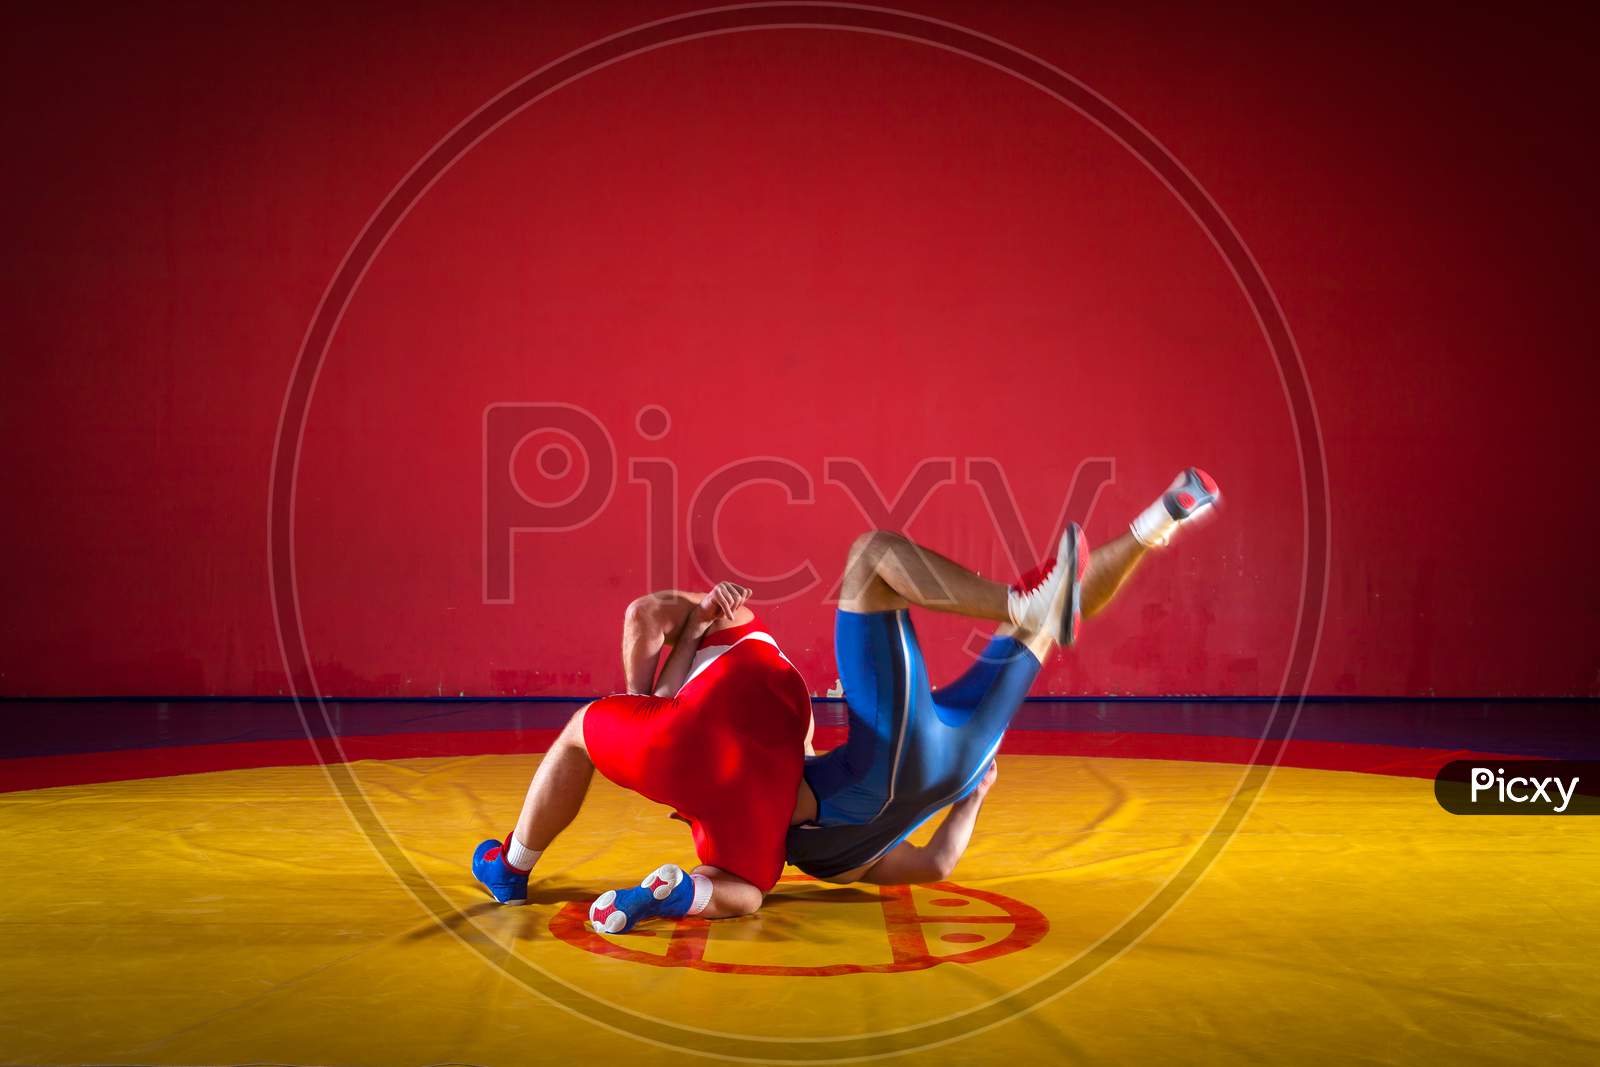 Two Strong Wrestlers In Blue And Red Wrestling Tights Are Wrestlng And Making A Suplex Wrestling On A Yellow Wrestling Carpet In The Gym. Young Man Doing Grapple.